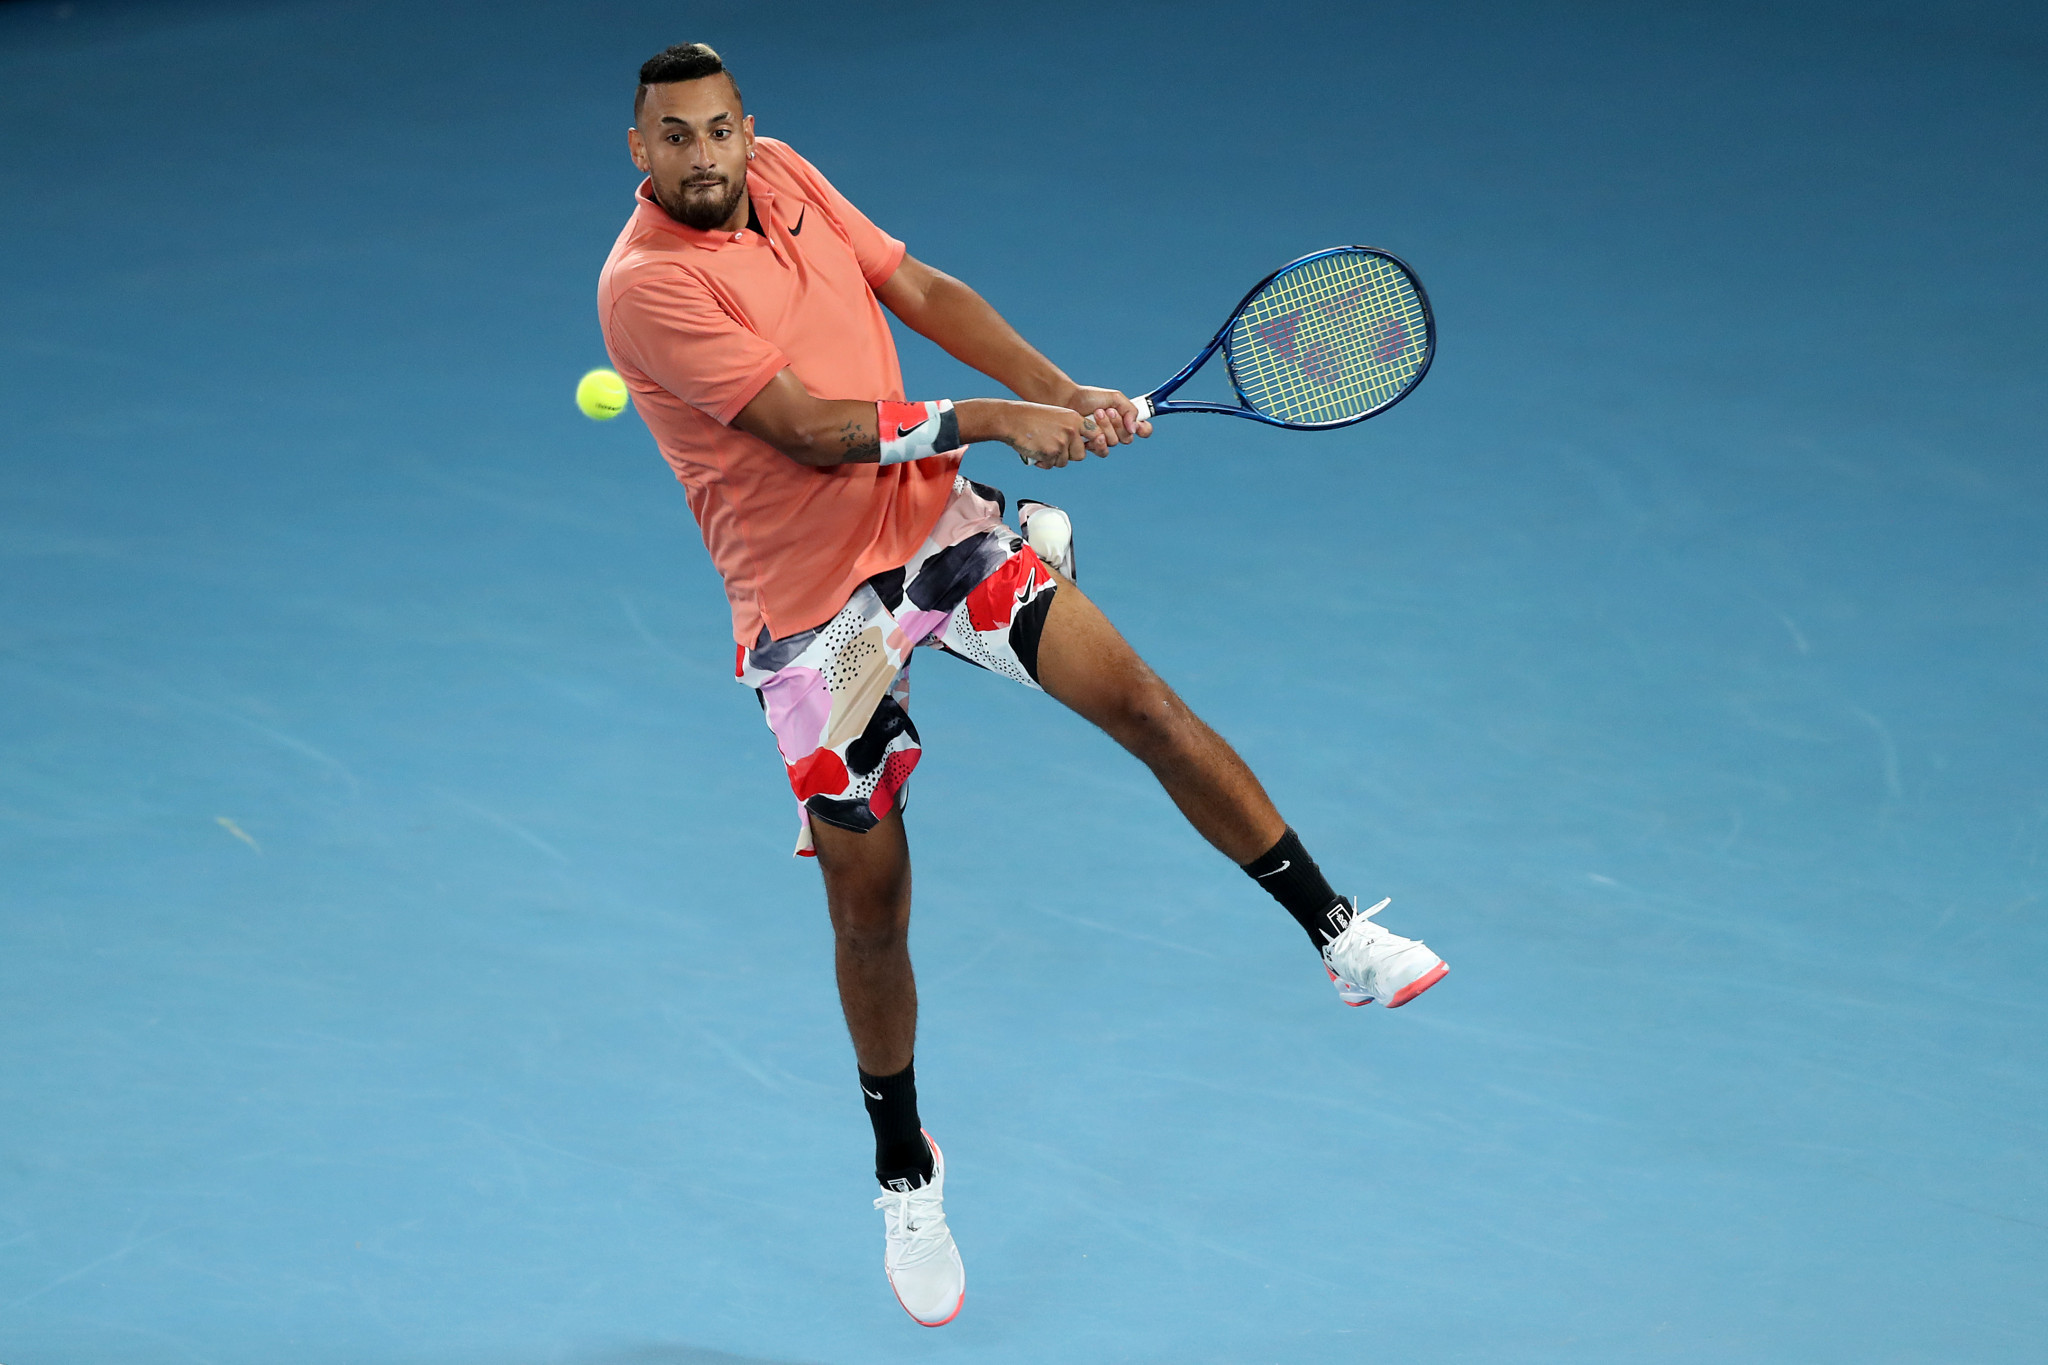 Tennis player Nick Kyrgios announced his intention to compete at the Tokyo 2020 Olympic Games ©Getty Images